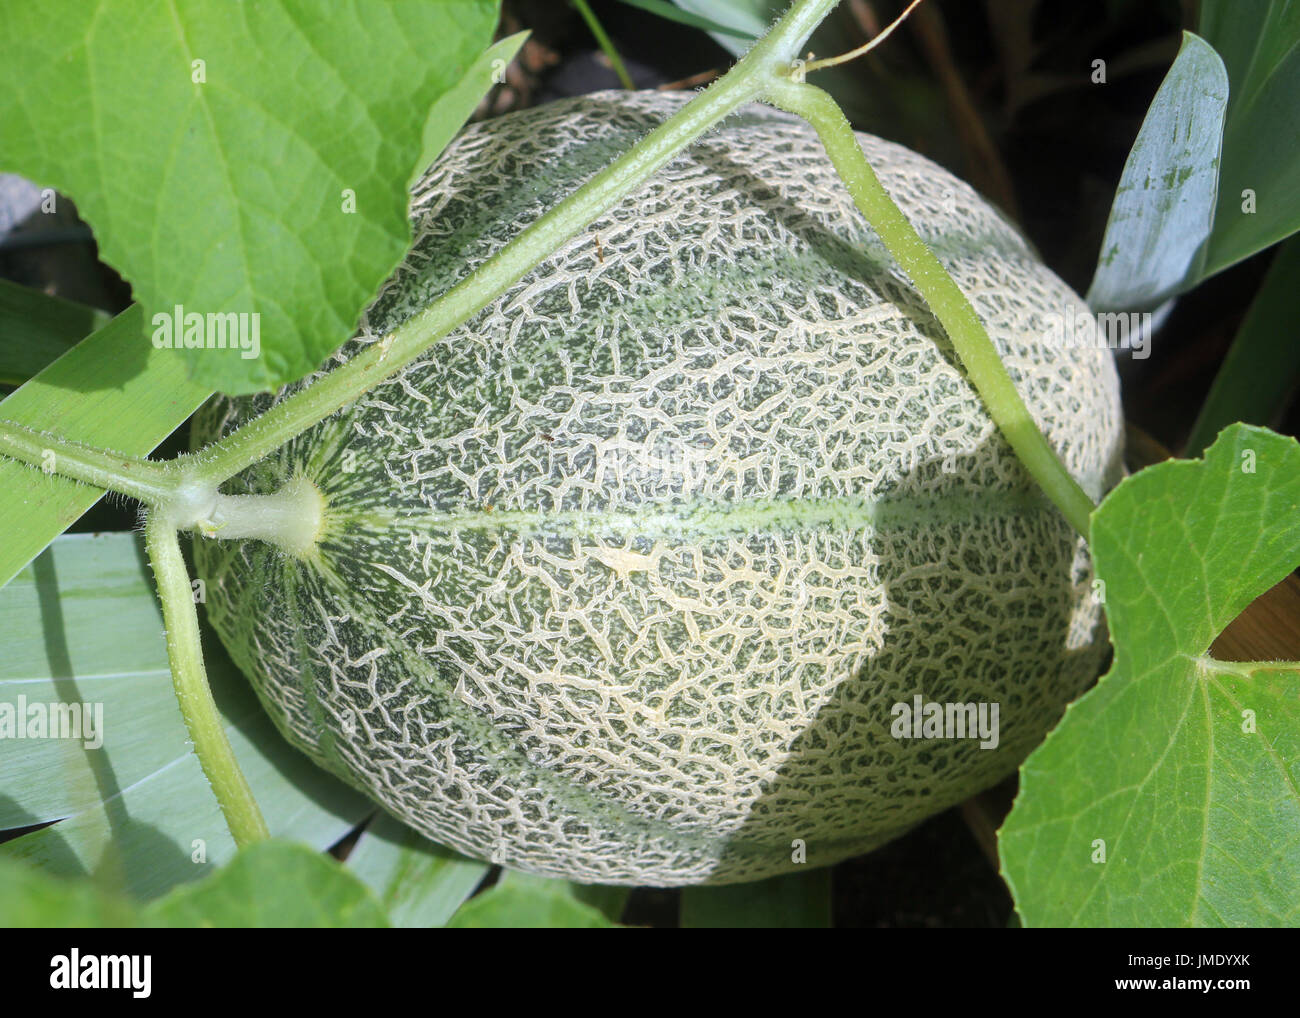 An unripe cantaloupe fruit is ripening on the vine in a garden with irises. Stock Photo